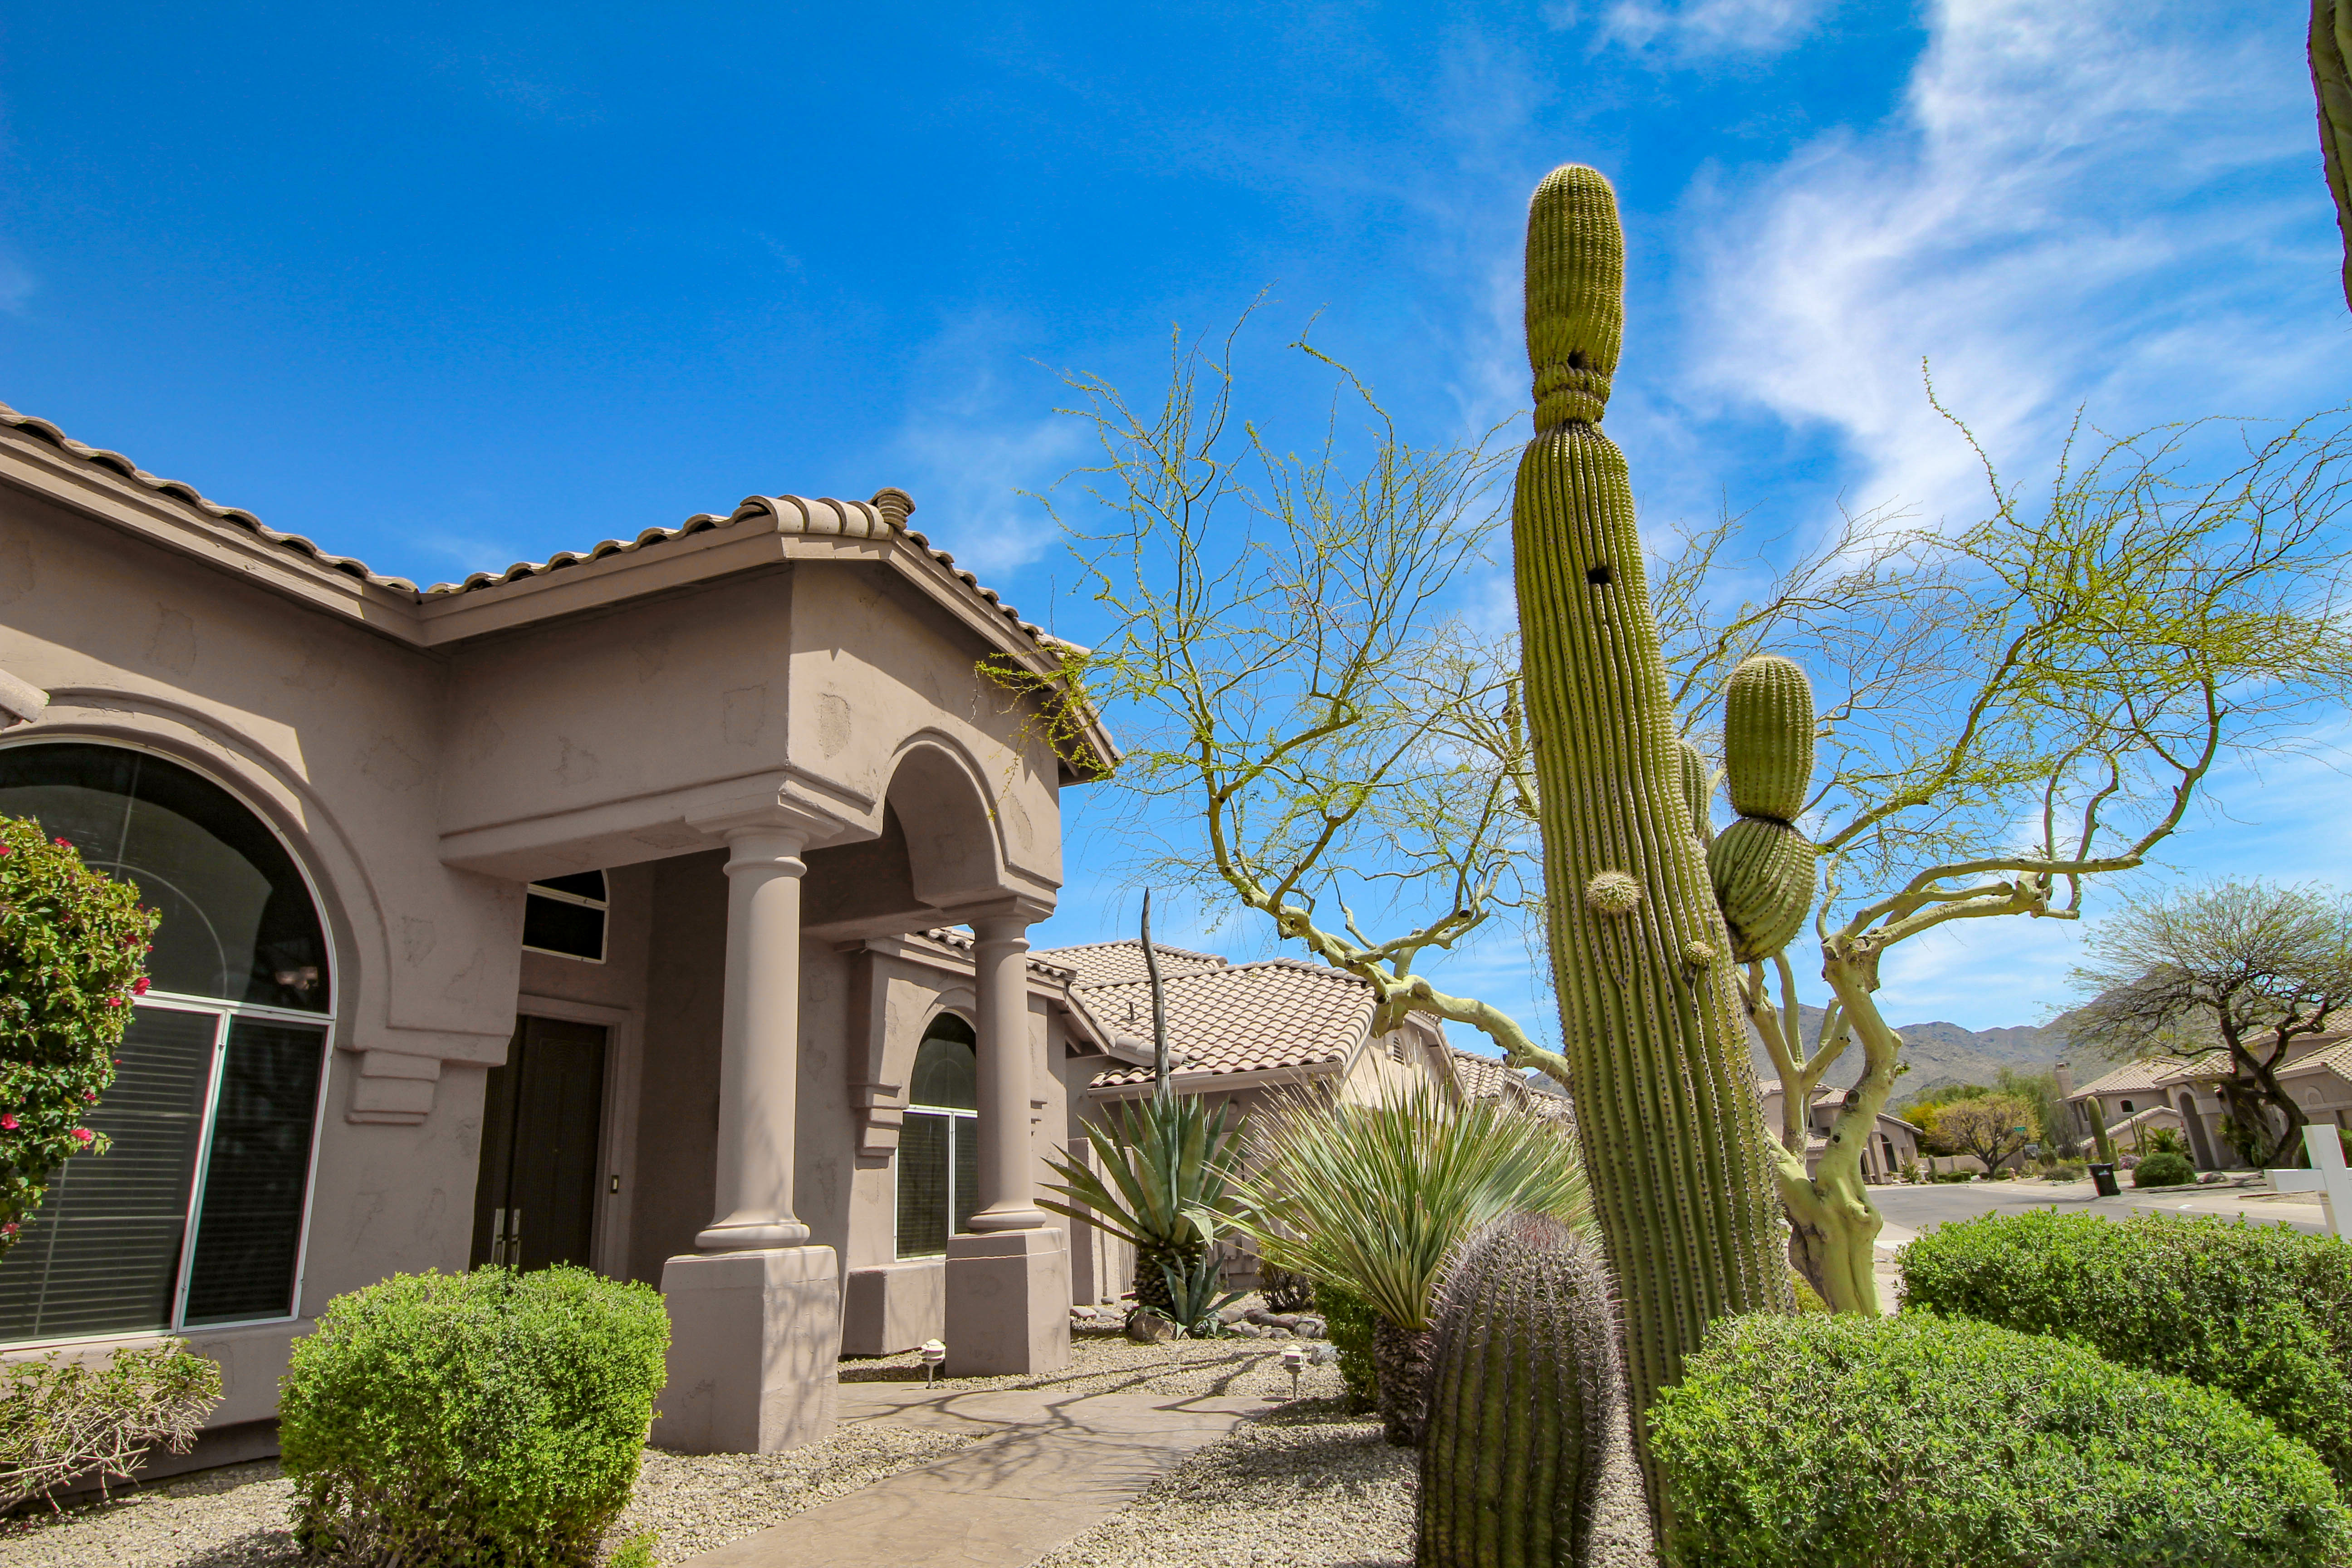 Types of Homes to Buy in the Desert